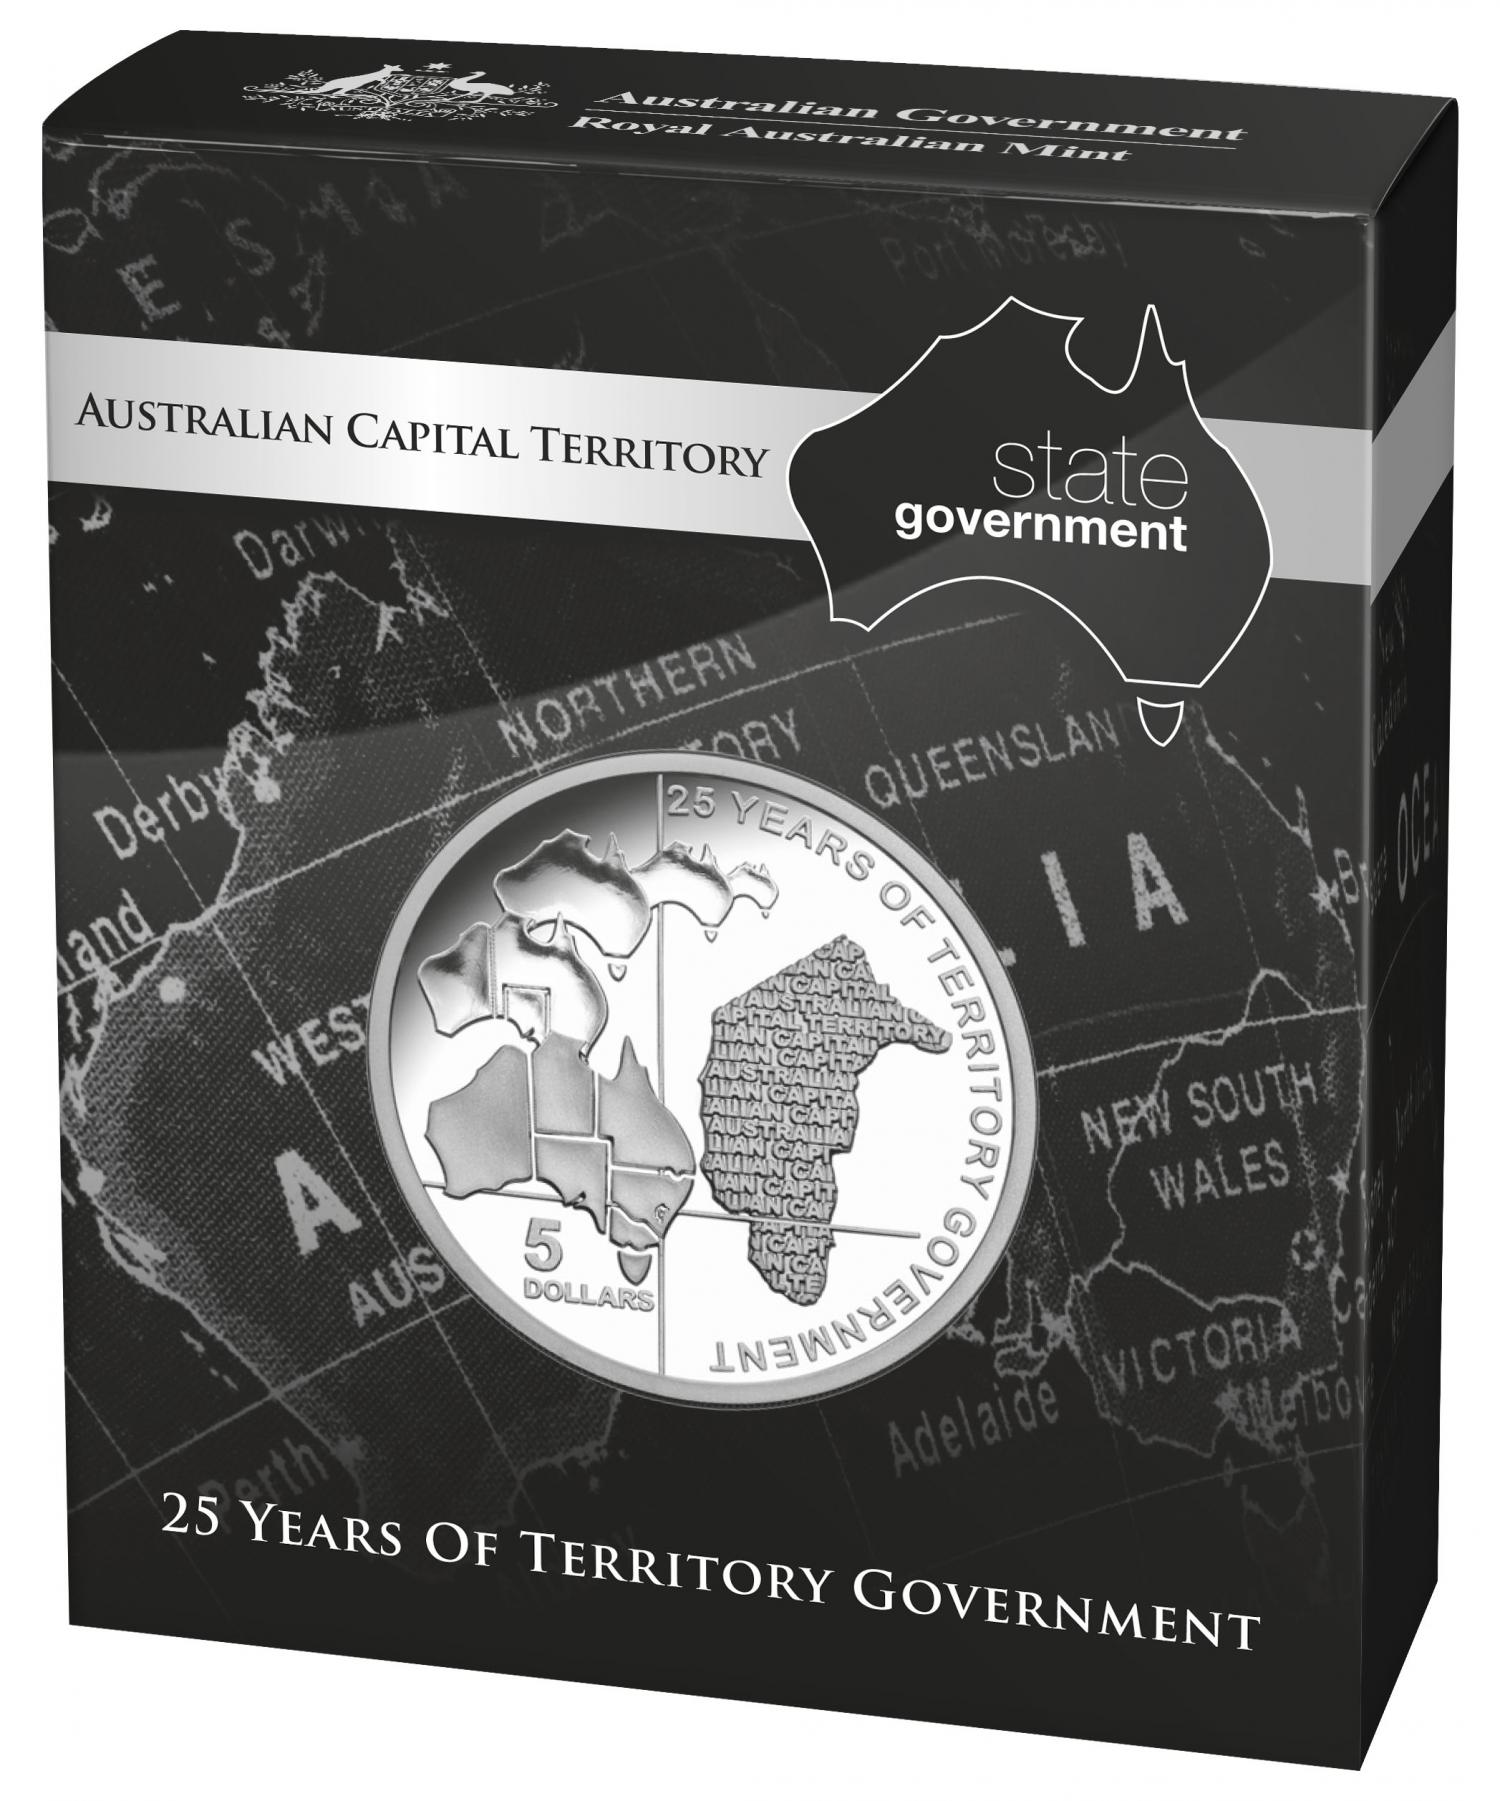 Thumbnail for 2014 $5.00 Silver Proof Australian Capital Territory 25 Years of Territory Government